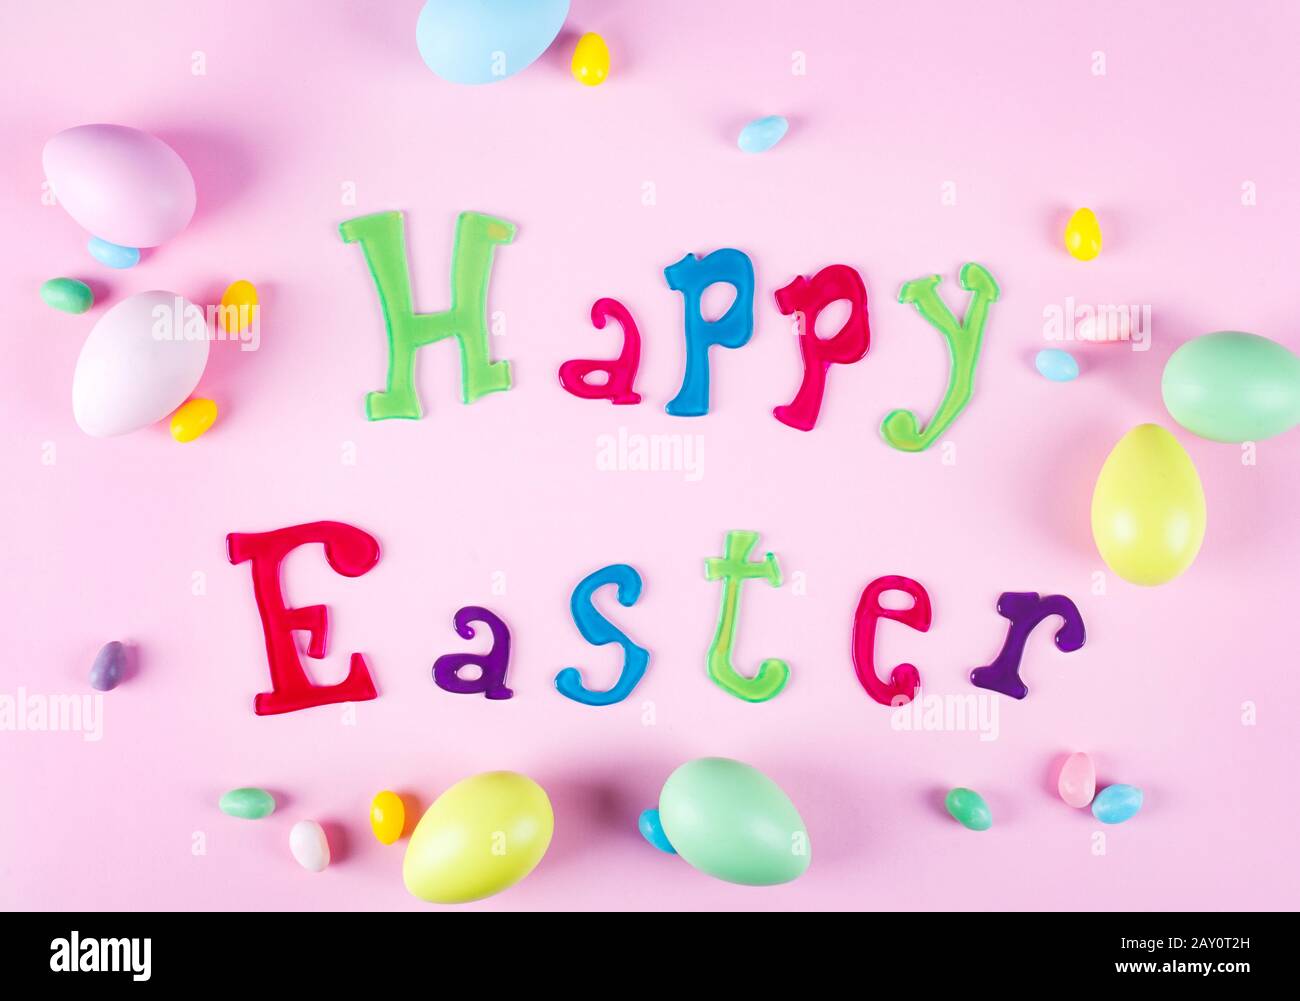 Happy Easter and Easter eggs Stock Photo